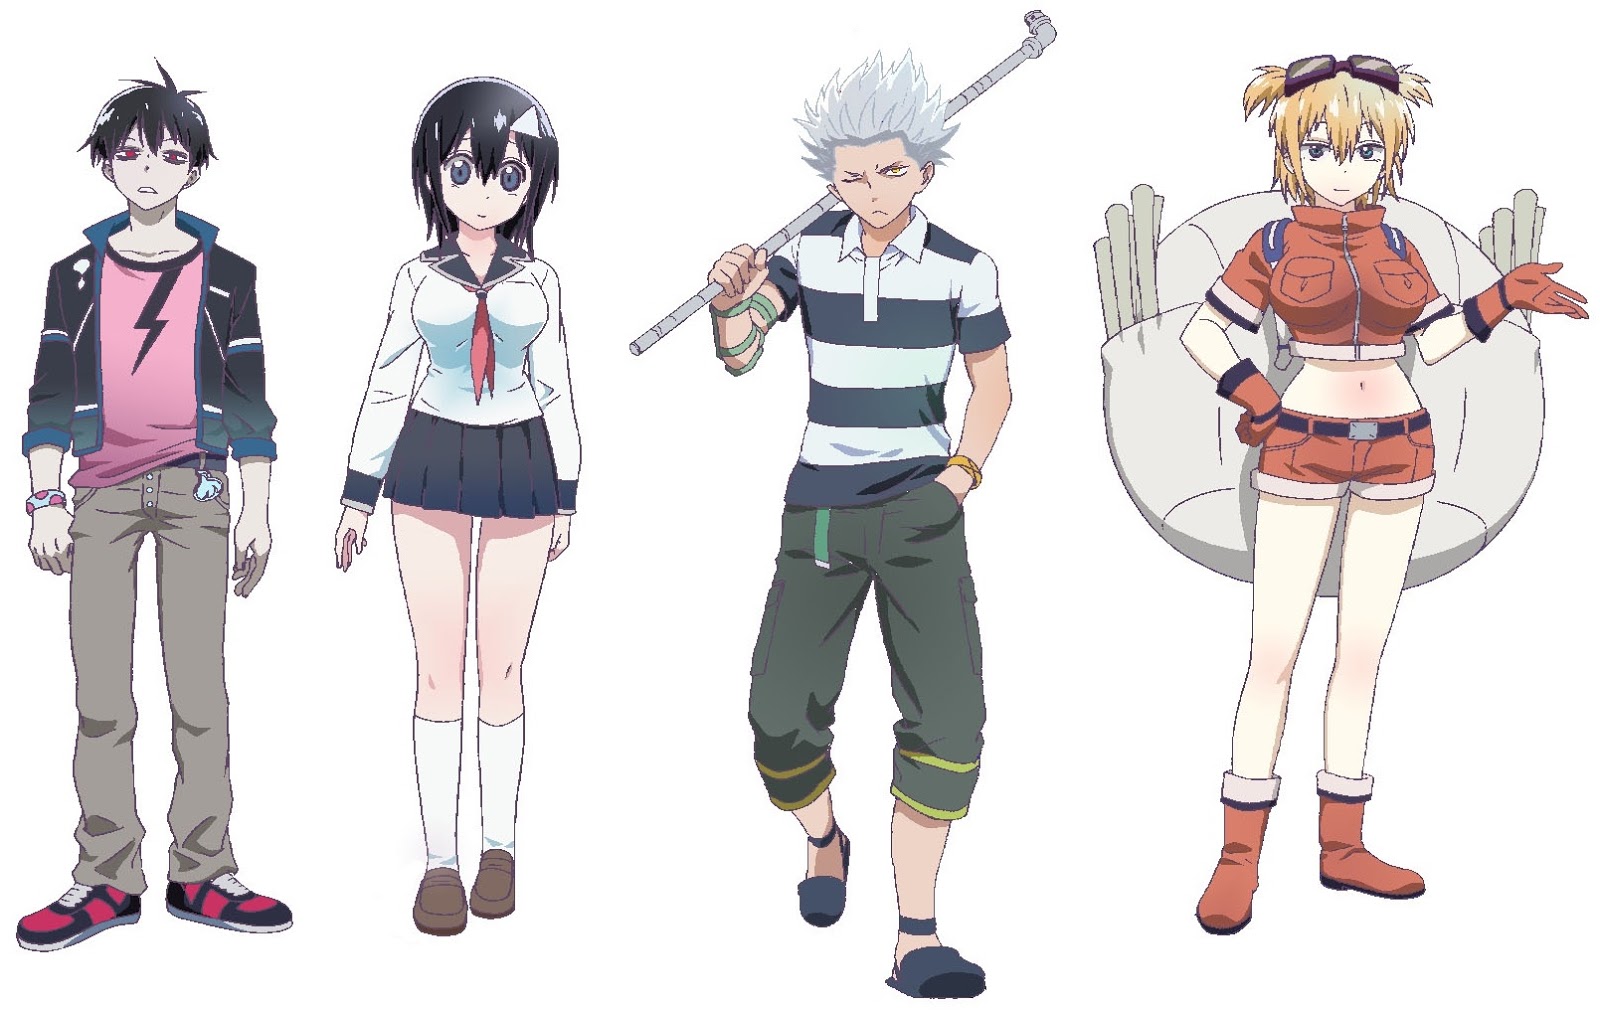 Blood Lad Charcters image - itzellyd - Indie DB